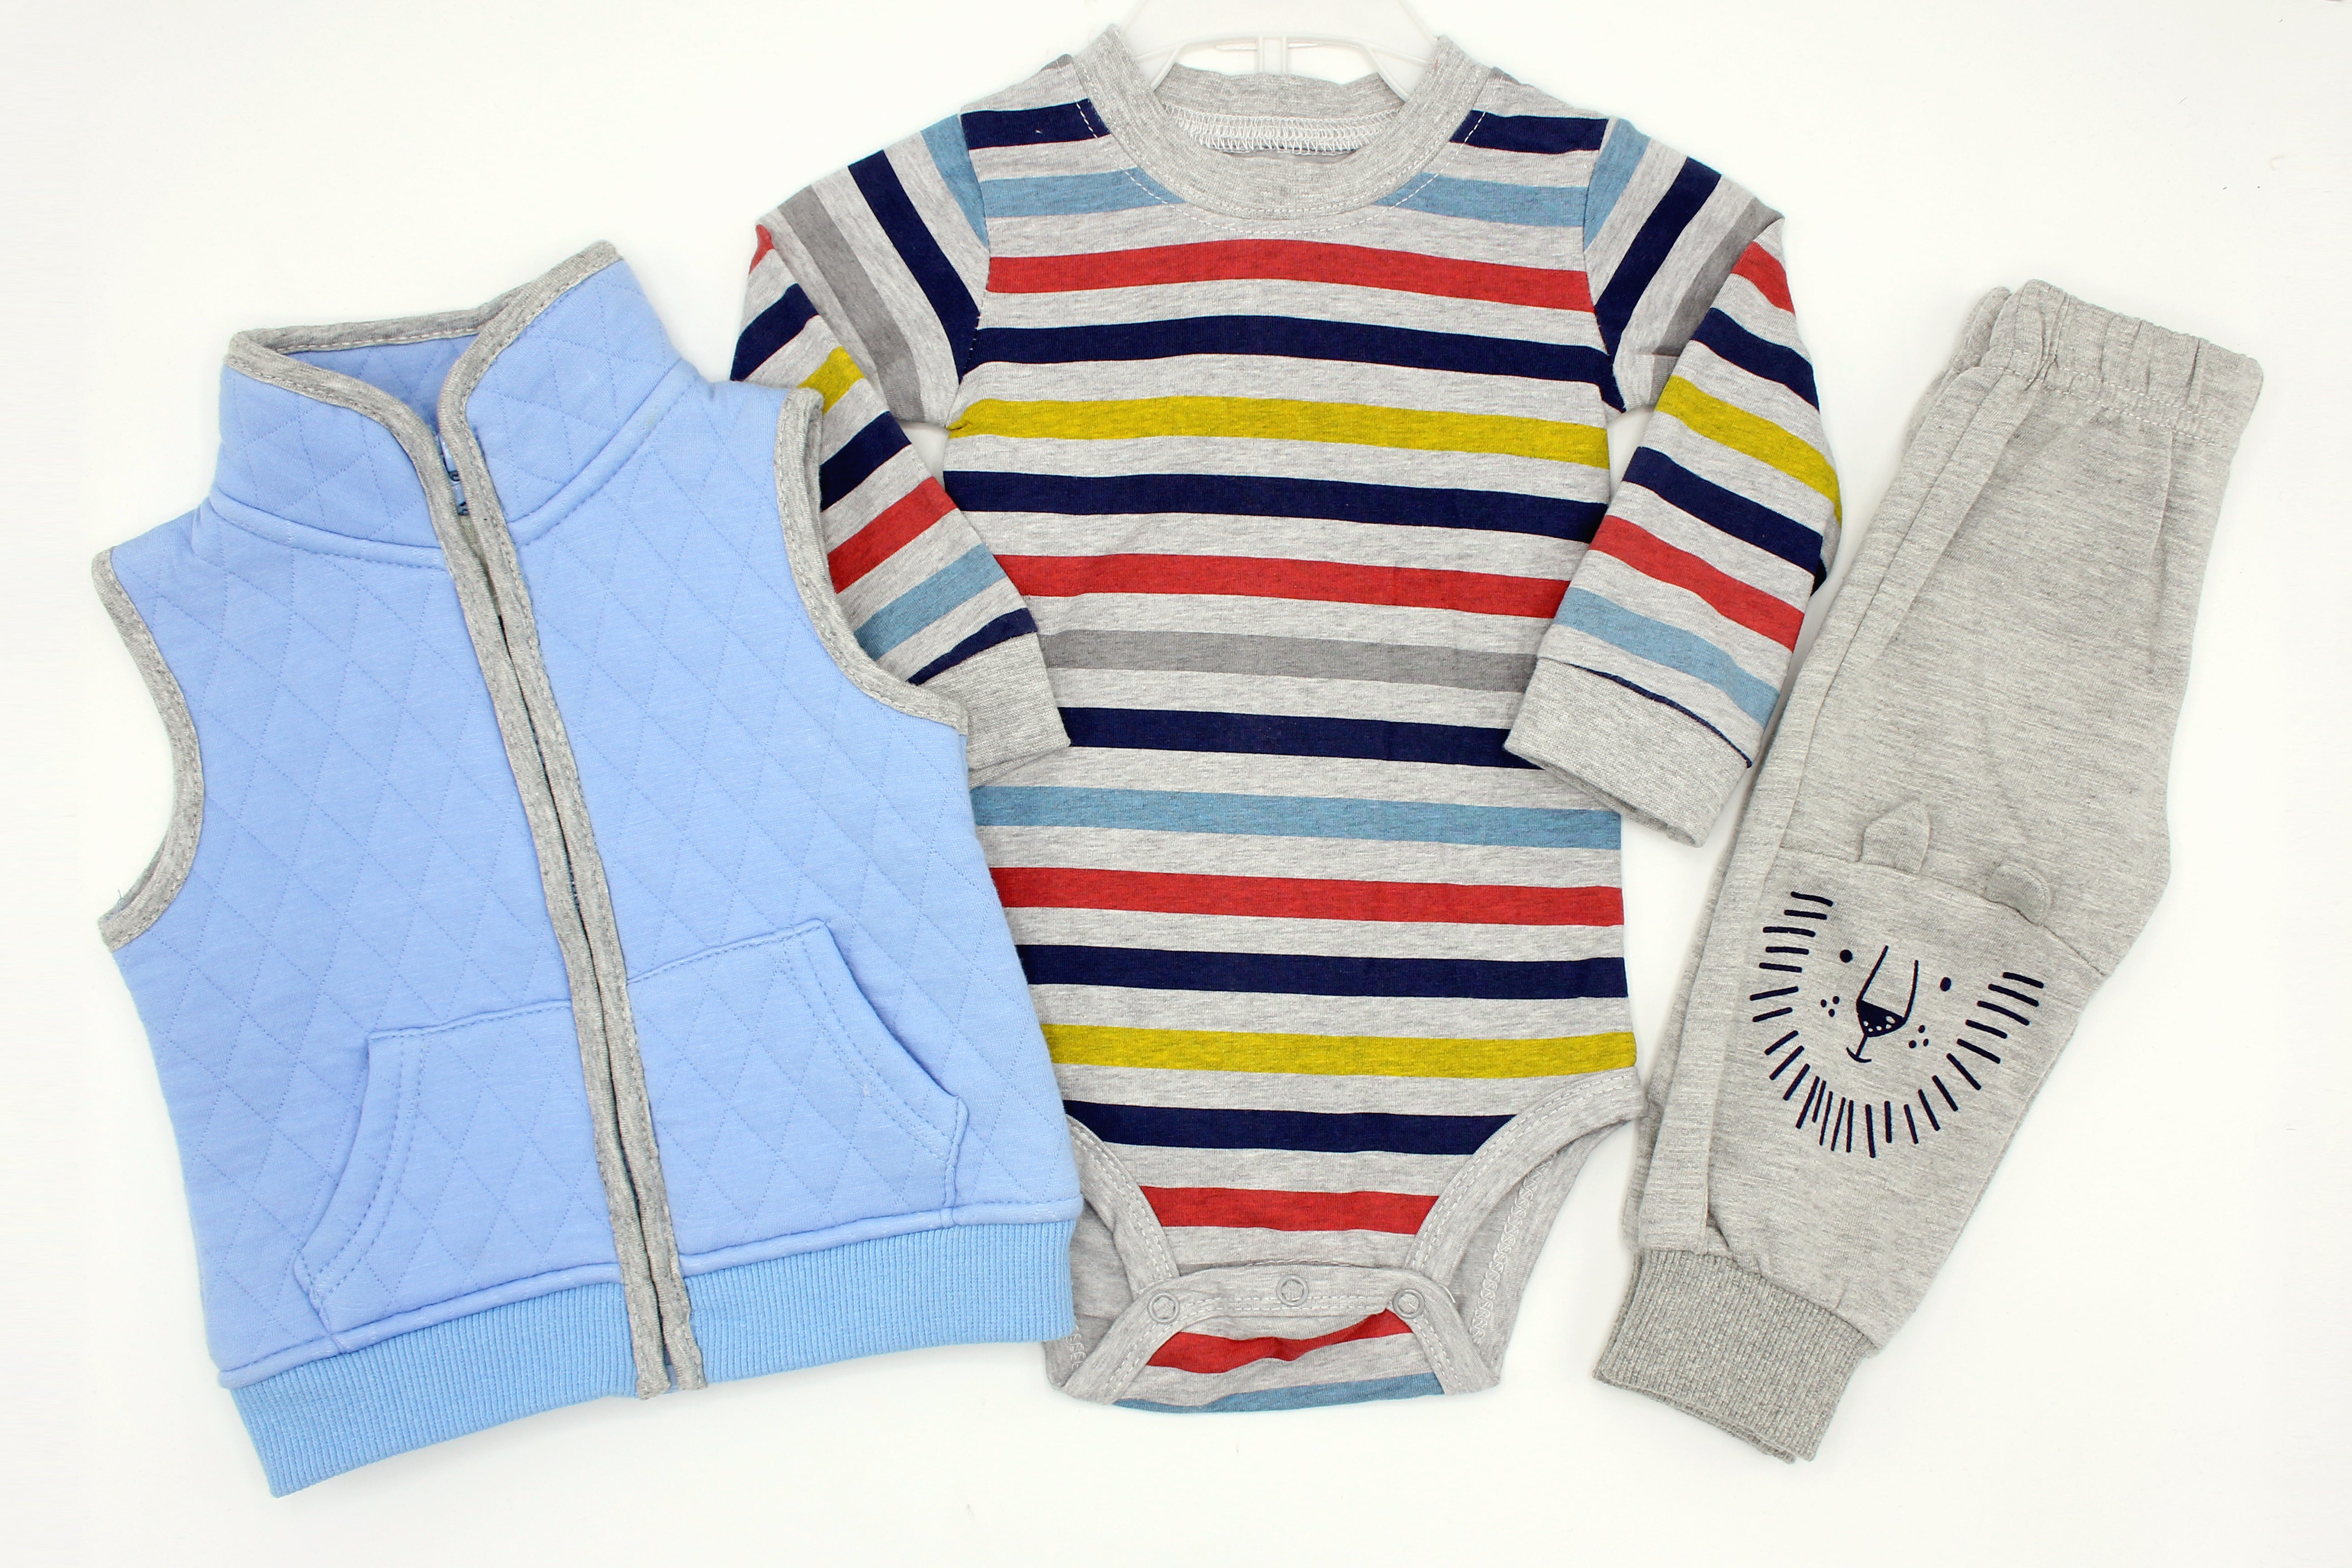 BABY BOY OUTFIT - 30144